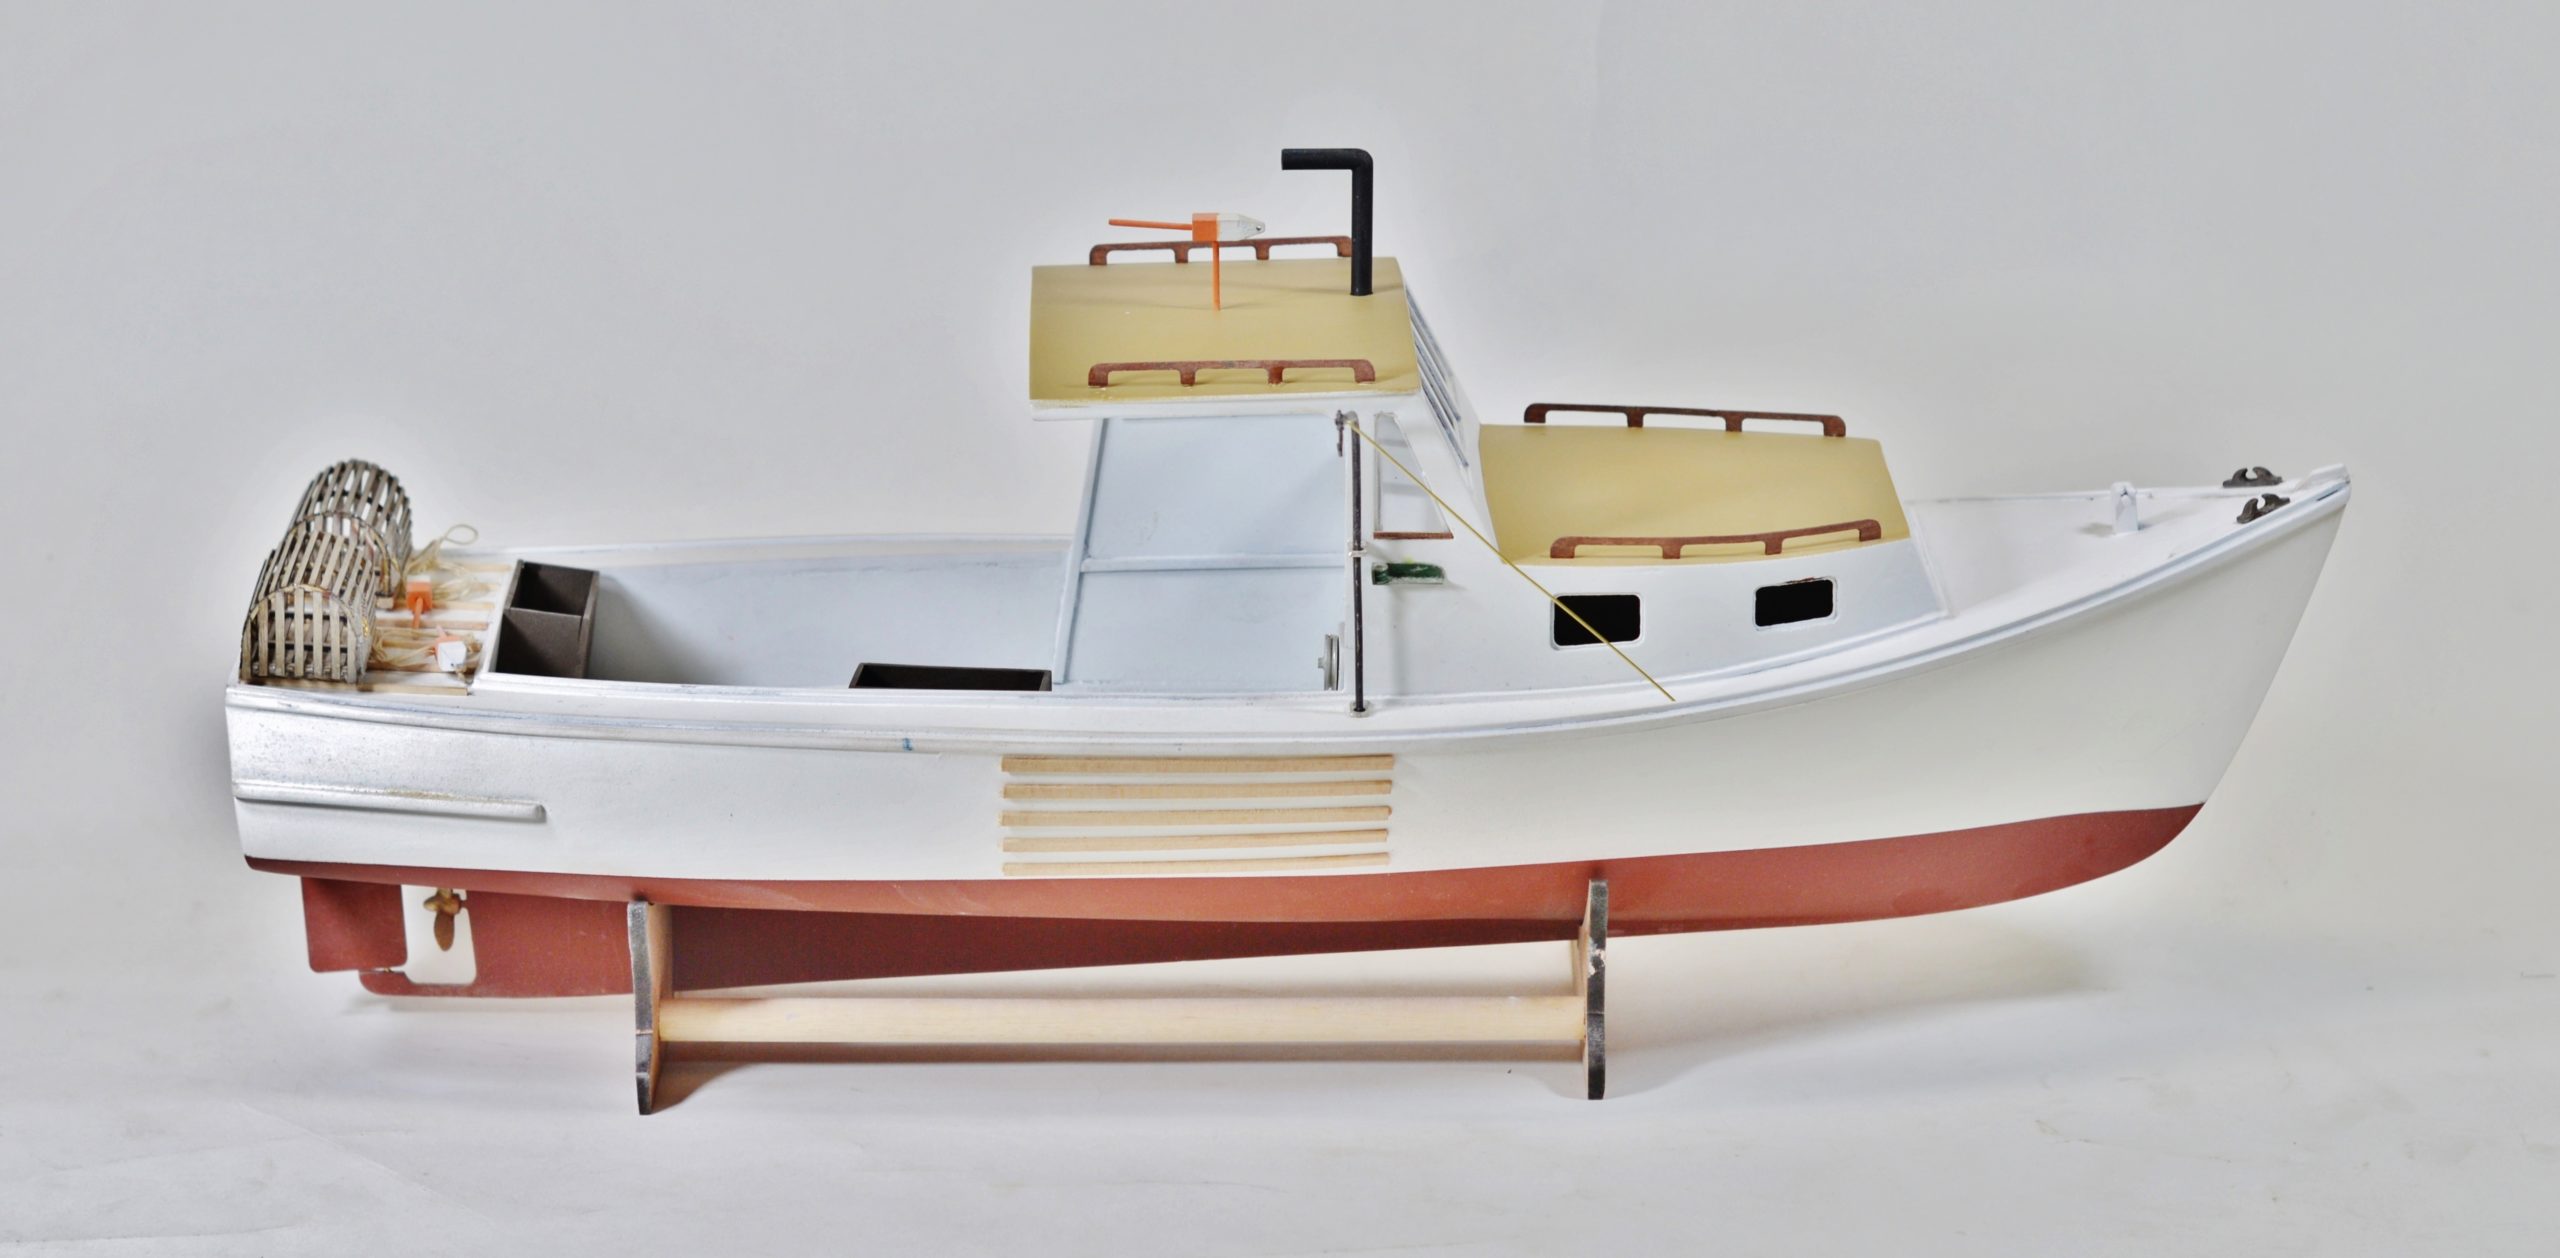 Maine Lobster Boat by ahb26 - FINISHED - BlueJacket Shipcrafters - Scale  1:19 approx (5/8 = 1') - - Kit build logs for subjects built from 1901 -  Present Day - Model Ship World™